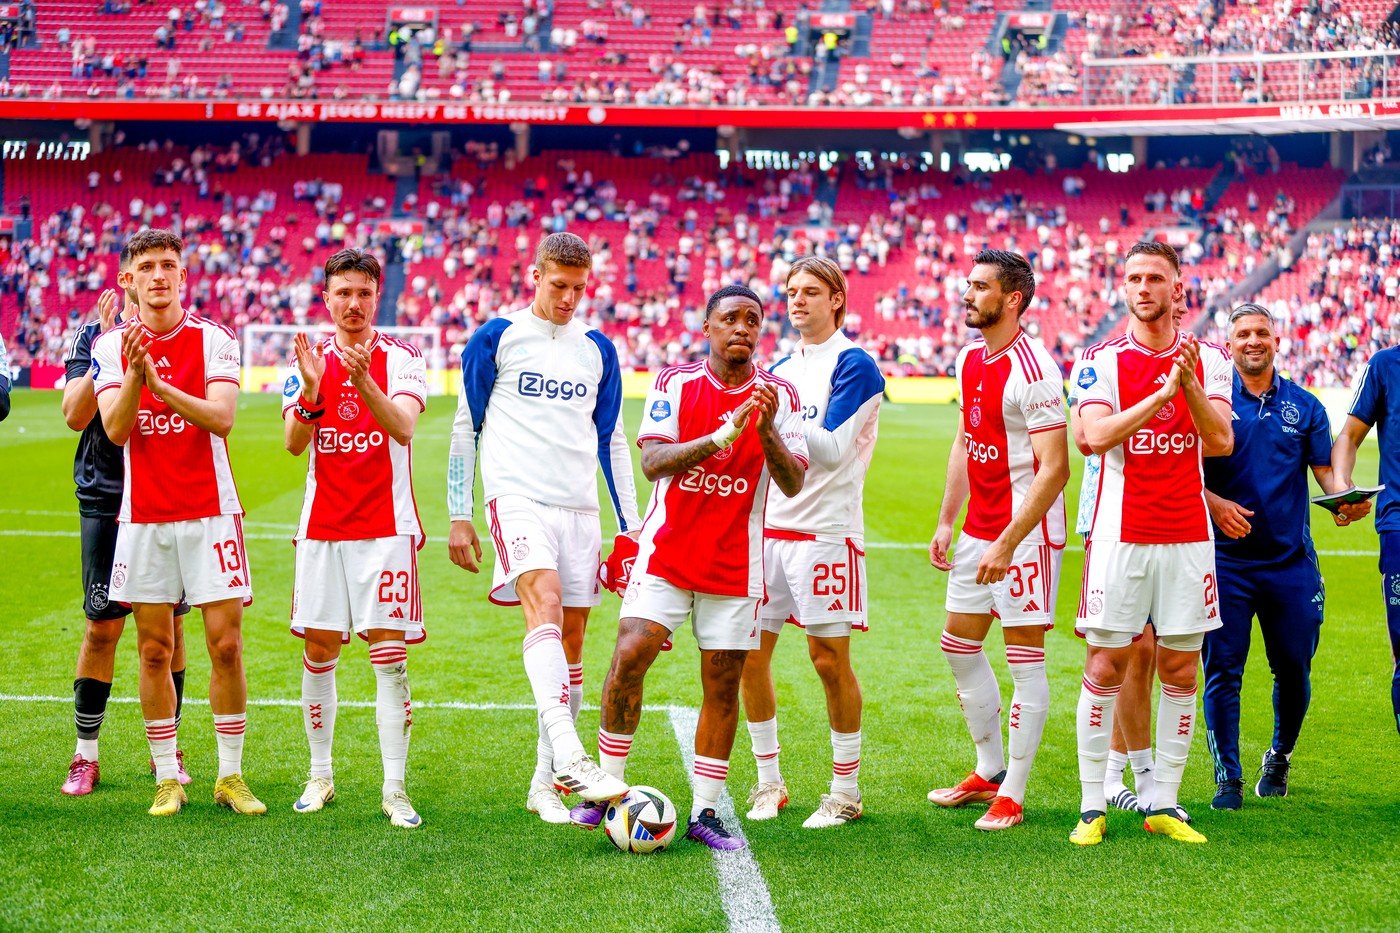 AMSTERDAM, 12-05-2024 , JohanCruijff
 Arena, football, Dutch Eredivisie, season 2023 / 2024, during the match Ajax - Almere City, Ajax player Mika Godts, Ajax player Steven Berghuis, Ajax player Jakov Medic, Ajax player Steven Bergwijn, Ajax player Borna Sosa, Ajax player Josip Sutalo, Ajax player Branco van den Boomen,Image: 872261417, License: Rights-managed, Restrictions: World Rights Except Austria and The Netherlands * AUTOUT NLDOUT, Model Release: no, Credit line: Pro Shots Photo Agency / ddp USA / Profimedia